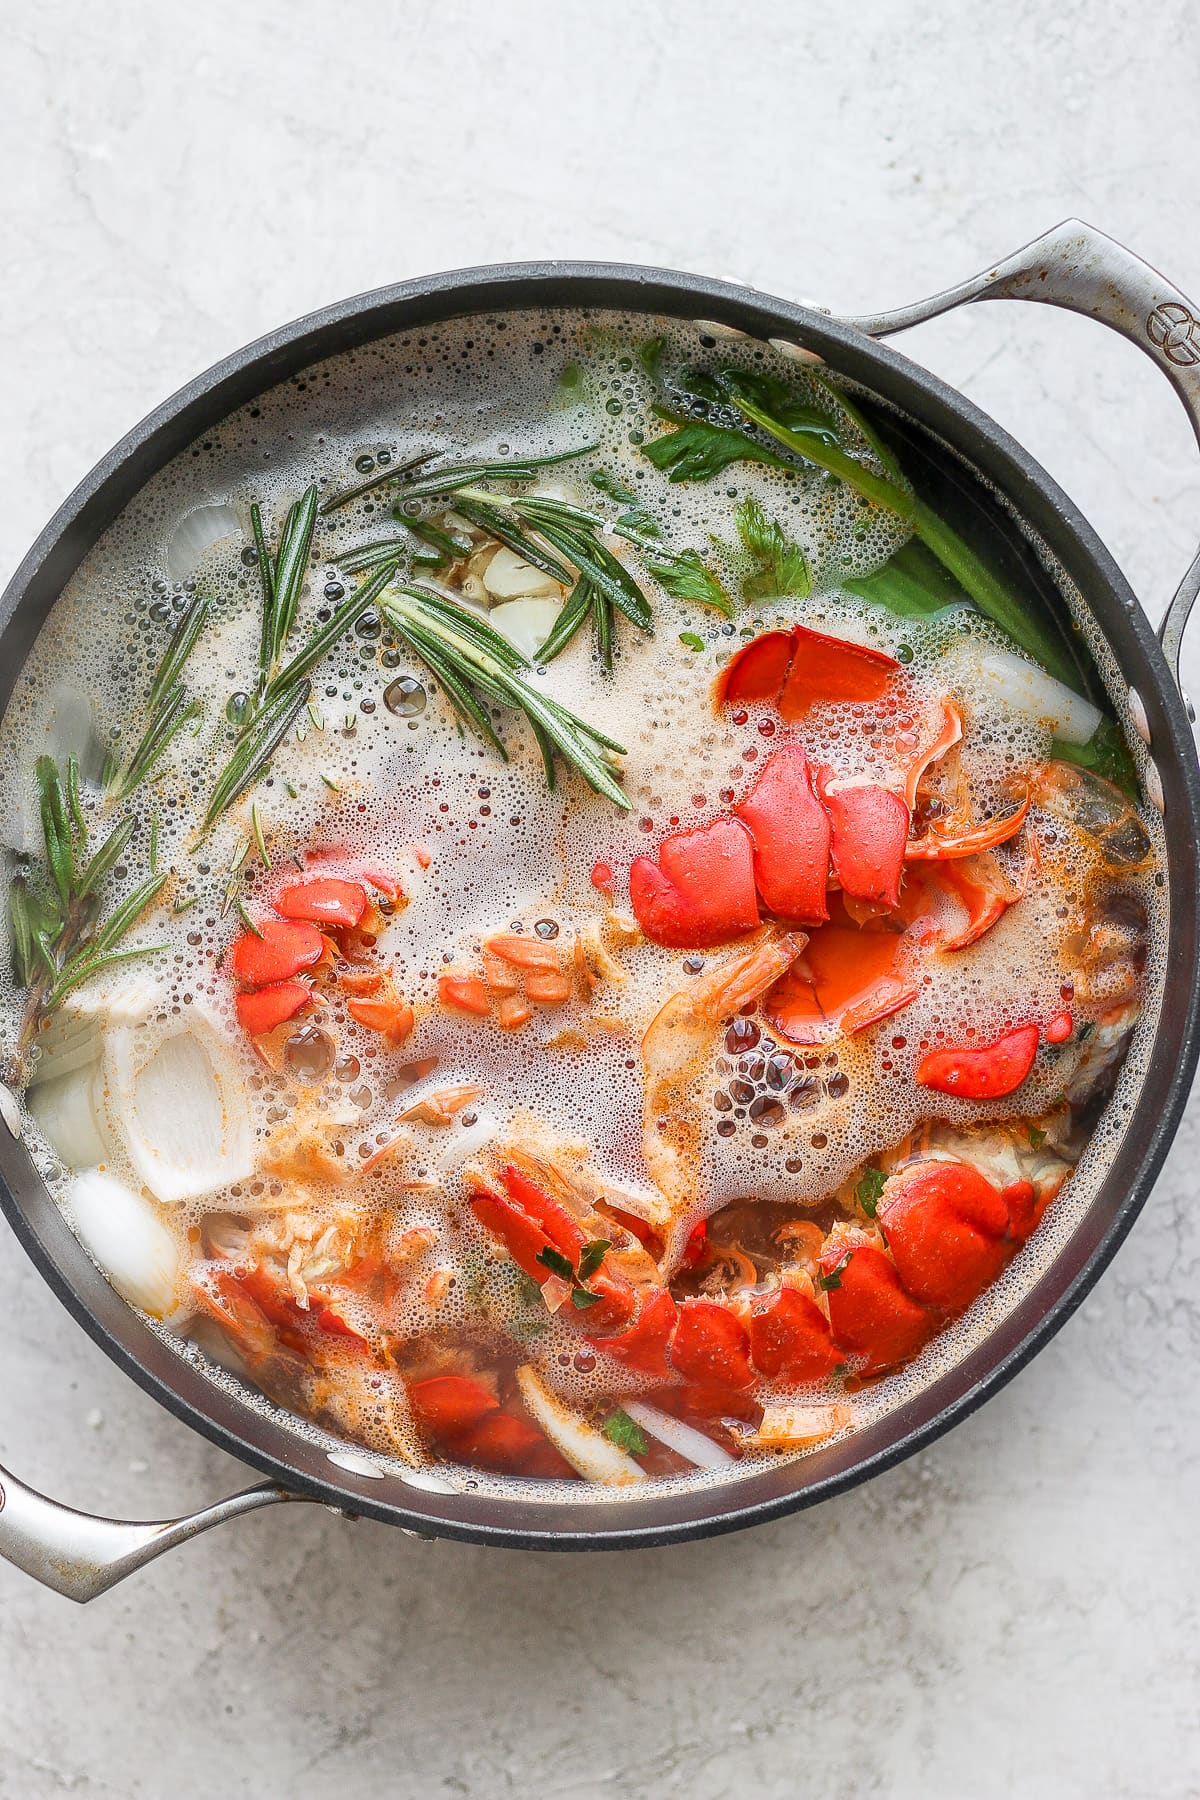 Dutch oven with seafood stock ingredients after being boiled.